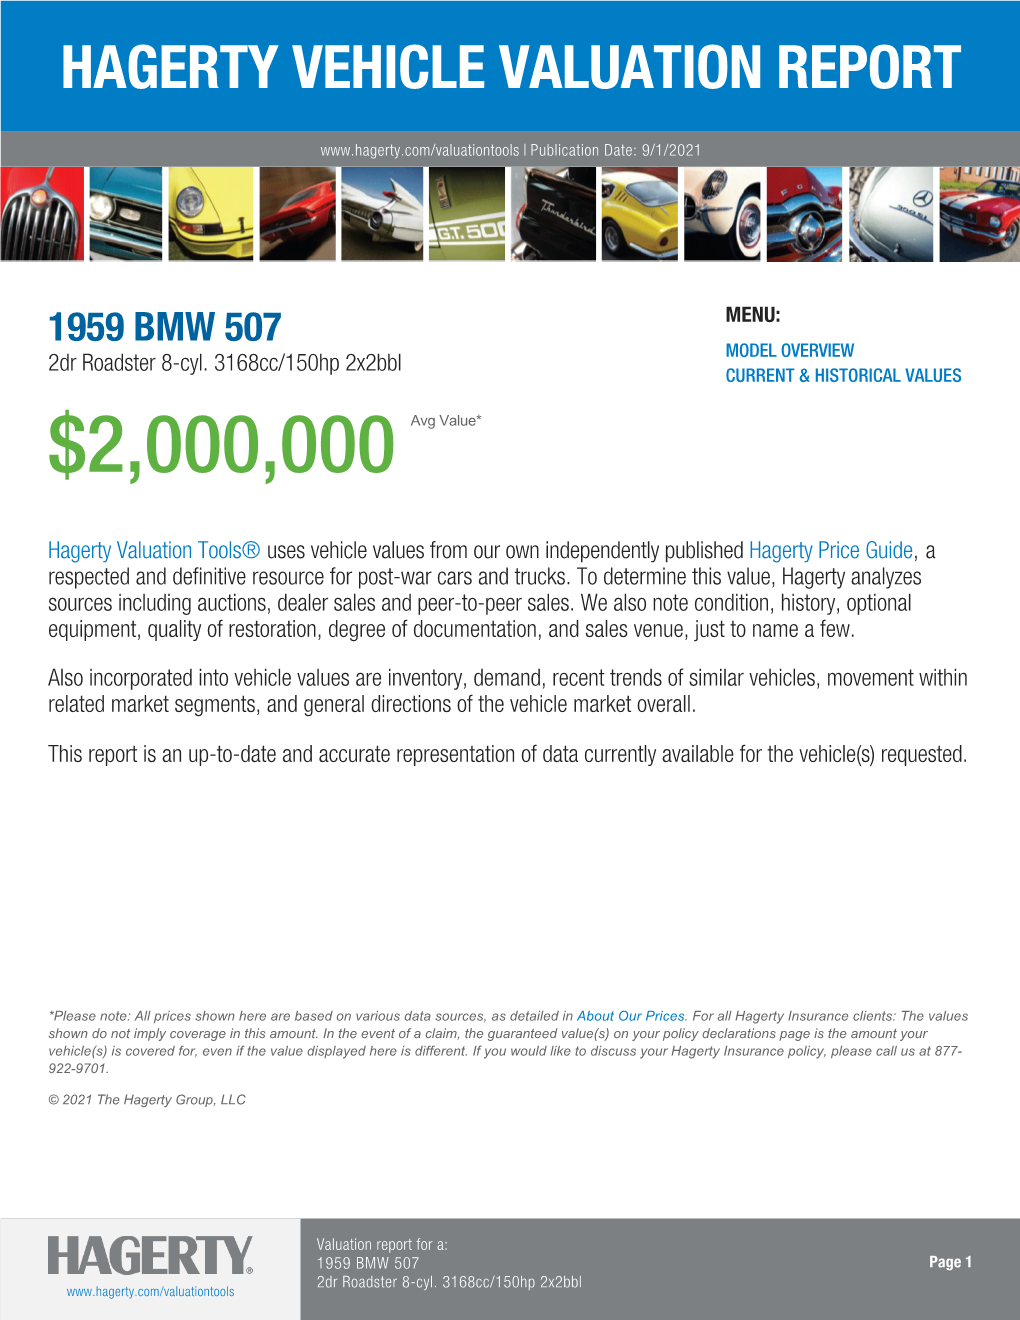 Vehicle Valuation Report